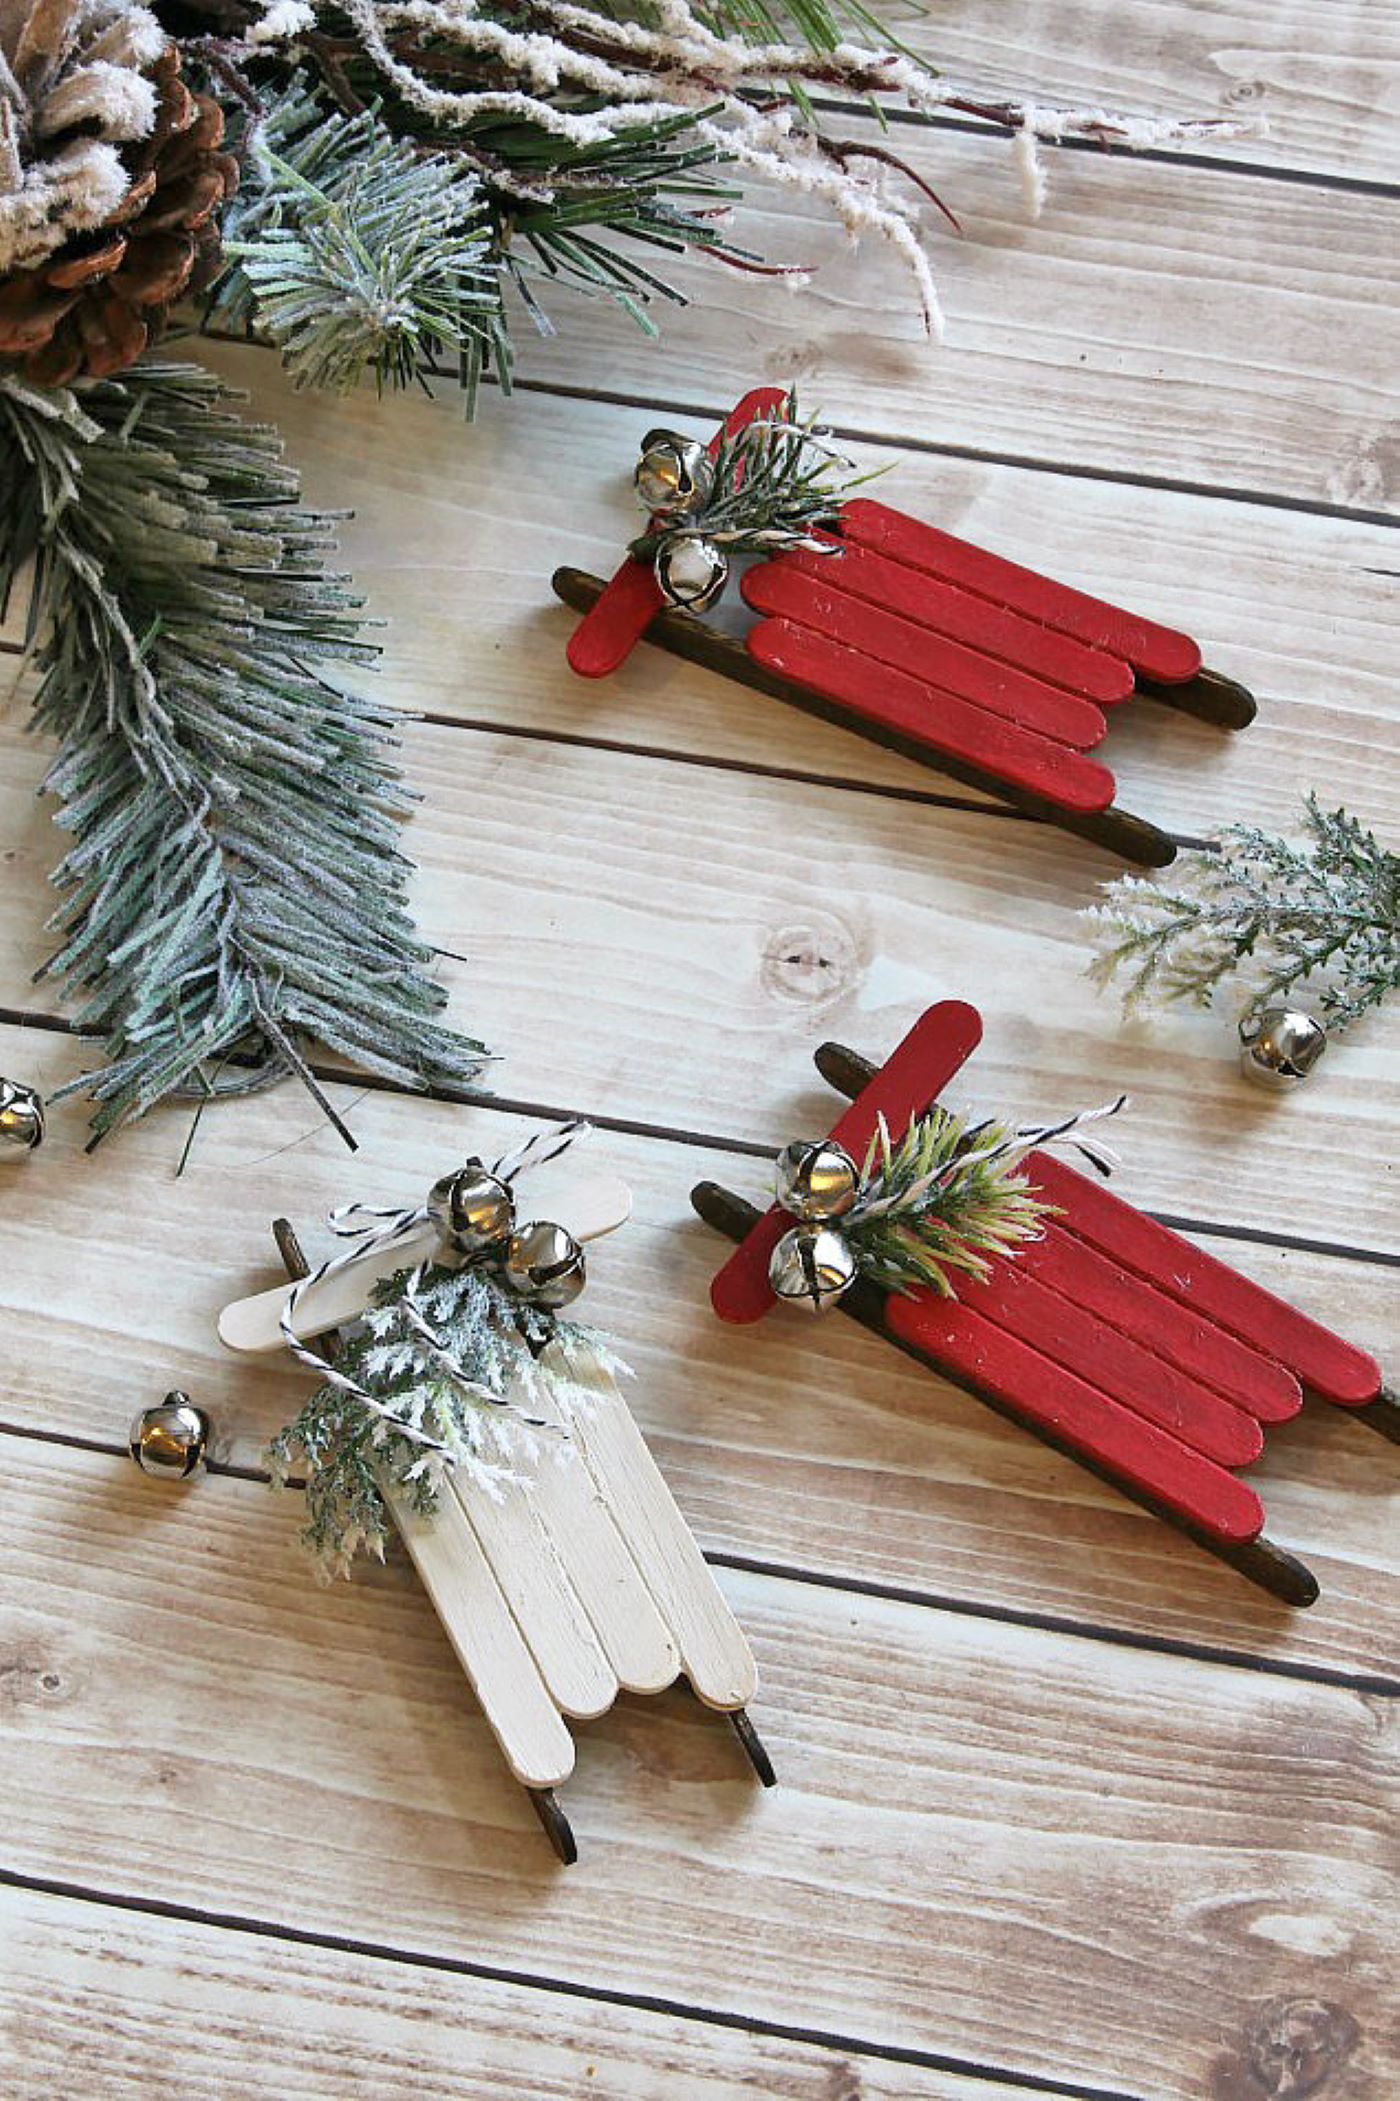 Three DIY ornaments made with painted popsicle sticks, spruce tips and mini silver bells made to look like sleighs.